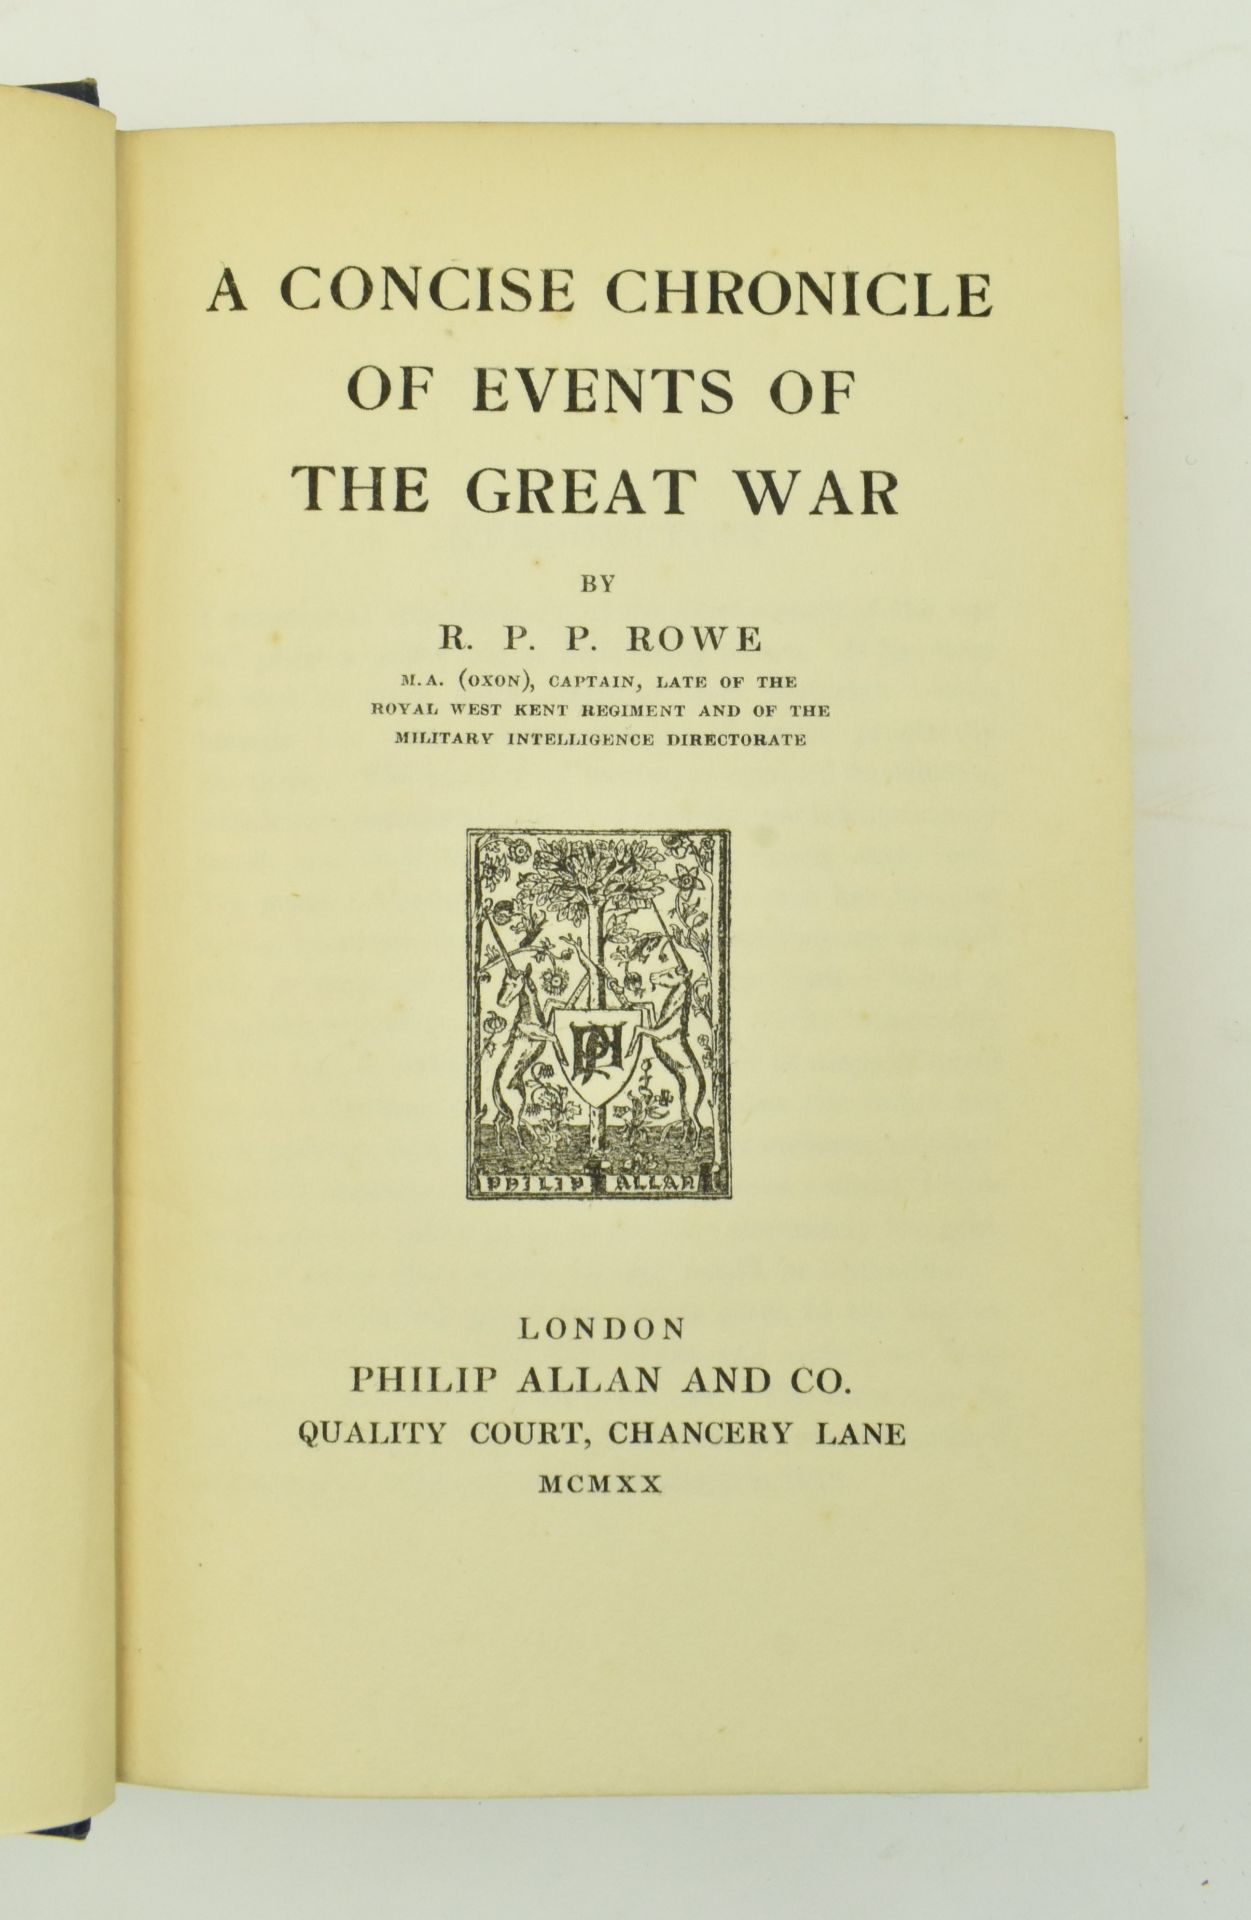 MILITARY WWI INTEREST. COLLECTION OF EIGHT BOOKS - Image 11 of 13